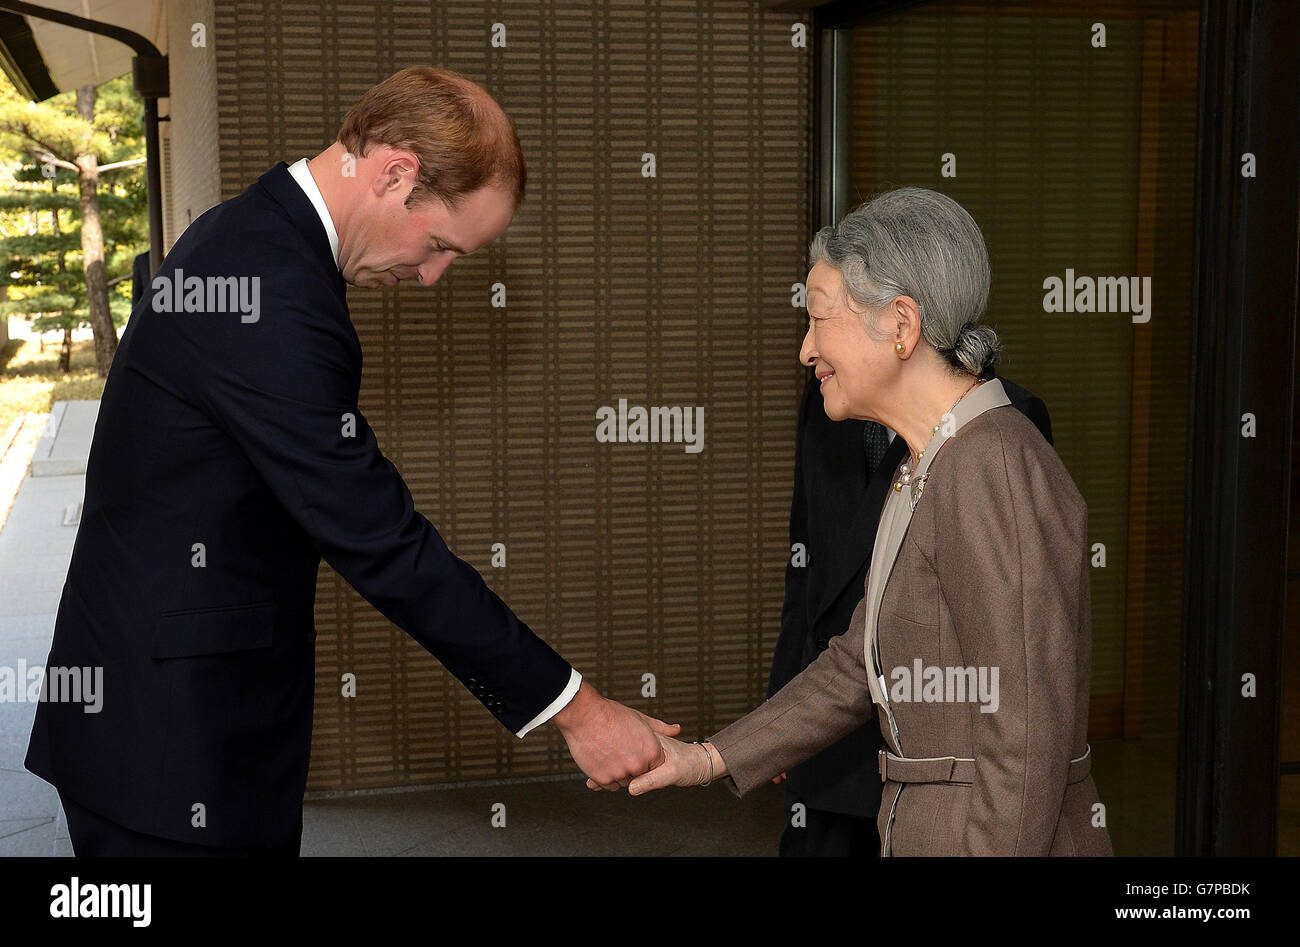 The Duke of Cambridge bows as he shakes hands with Empress Michiko, after he arrived for lunch with the Emperor and his wife at the couple's residence within the Royal Palace grounds in central Tokyo, during the second day of his trip to Japan. Stock Photo